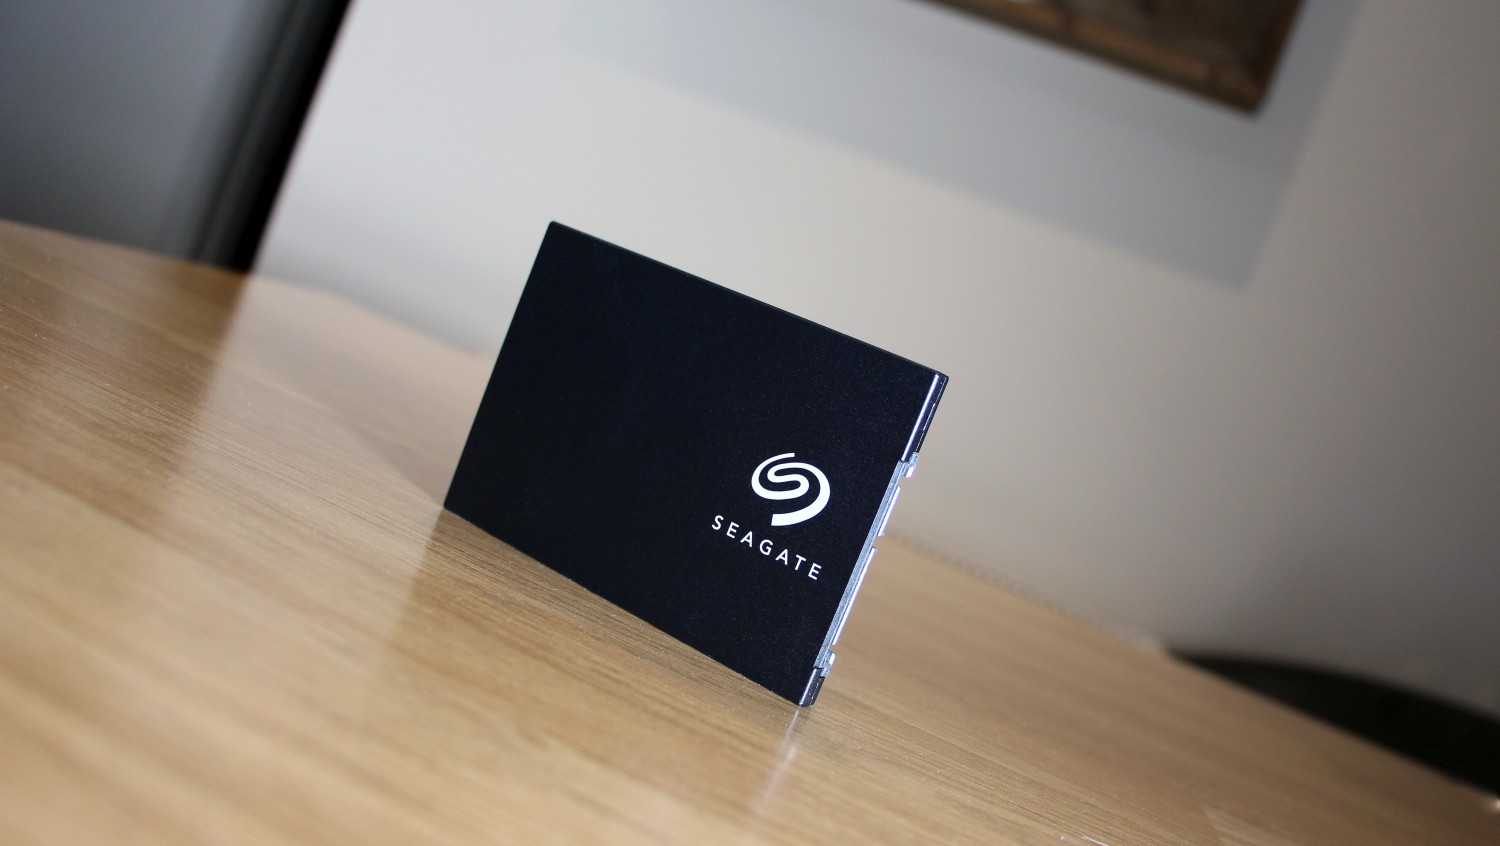 Photo of a Seagate BarraCuda SSD stood upright on a desk, with the white Seagate logo on the front